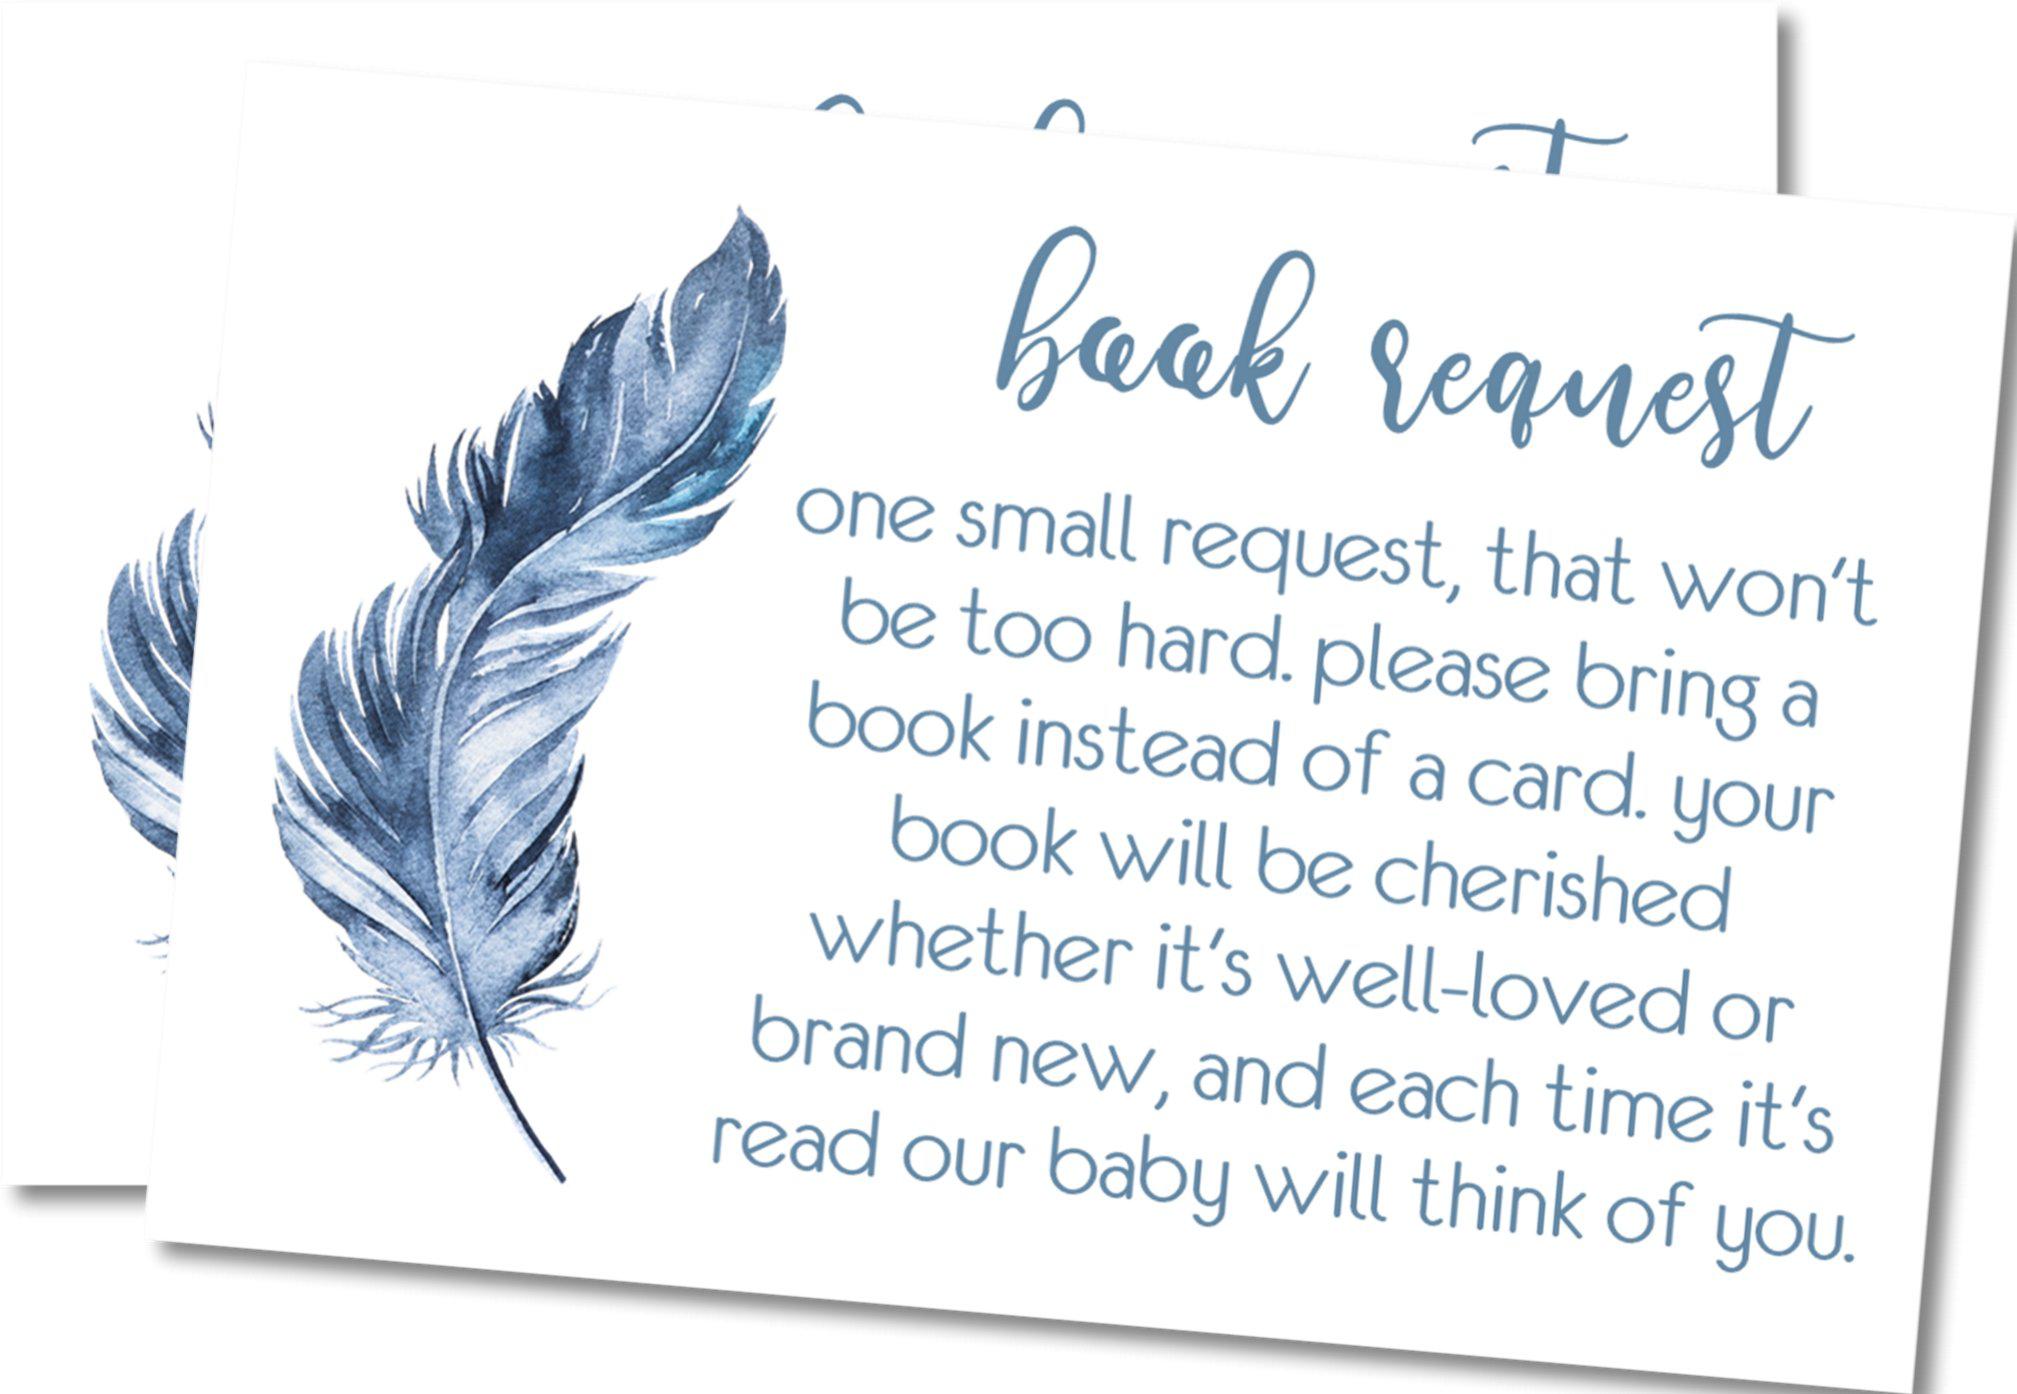 Blue Tribal Feather Book Request Cards